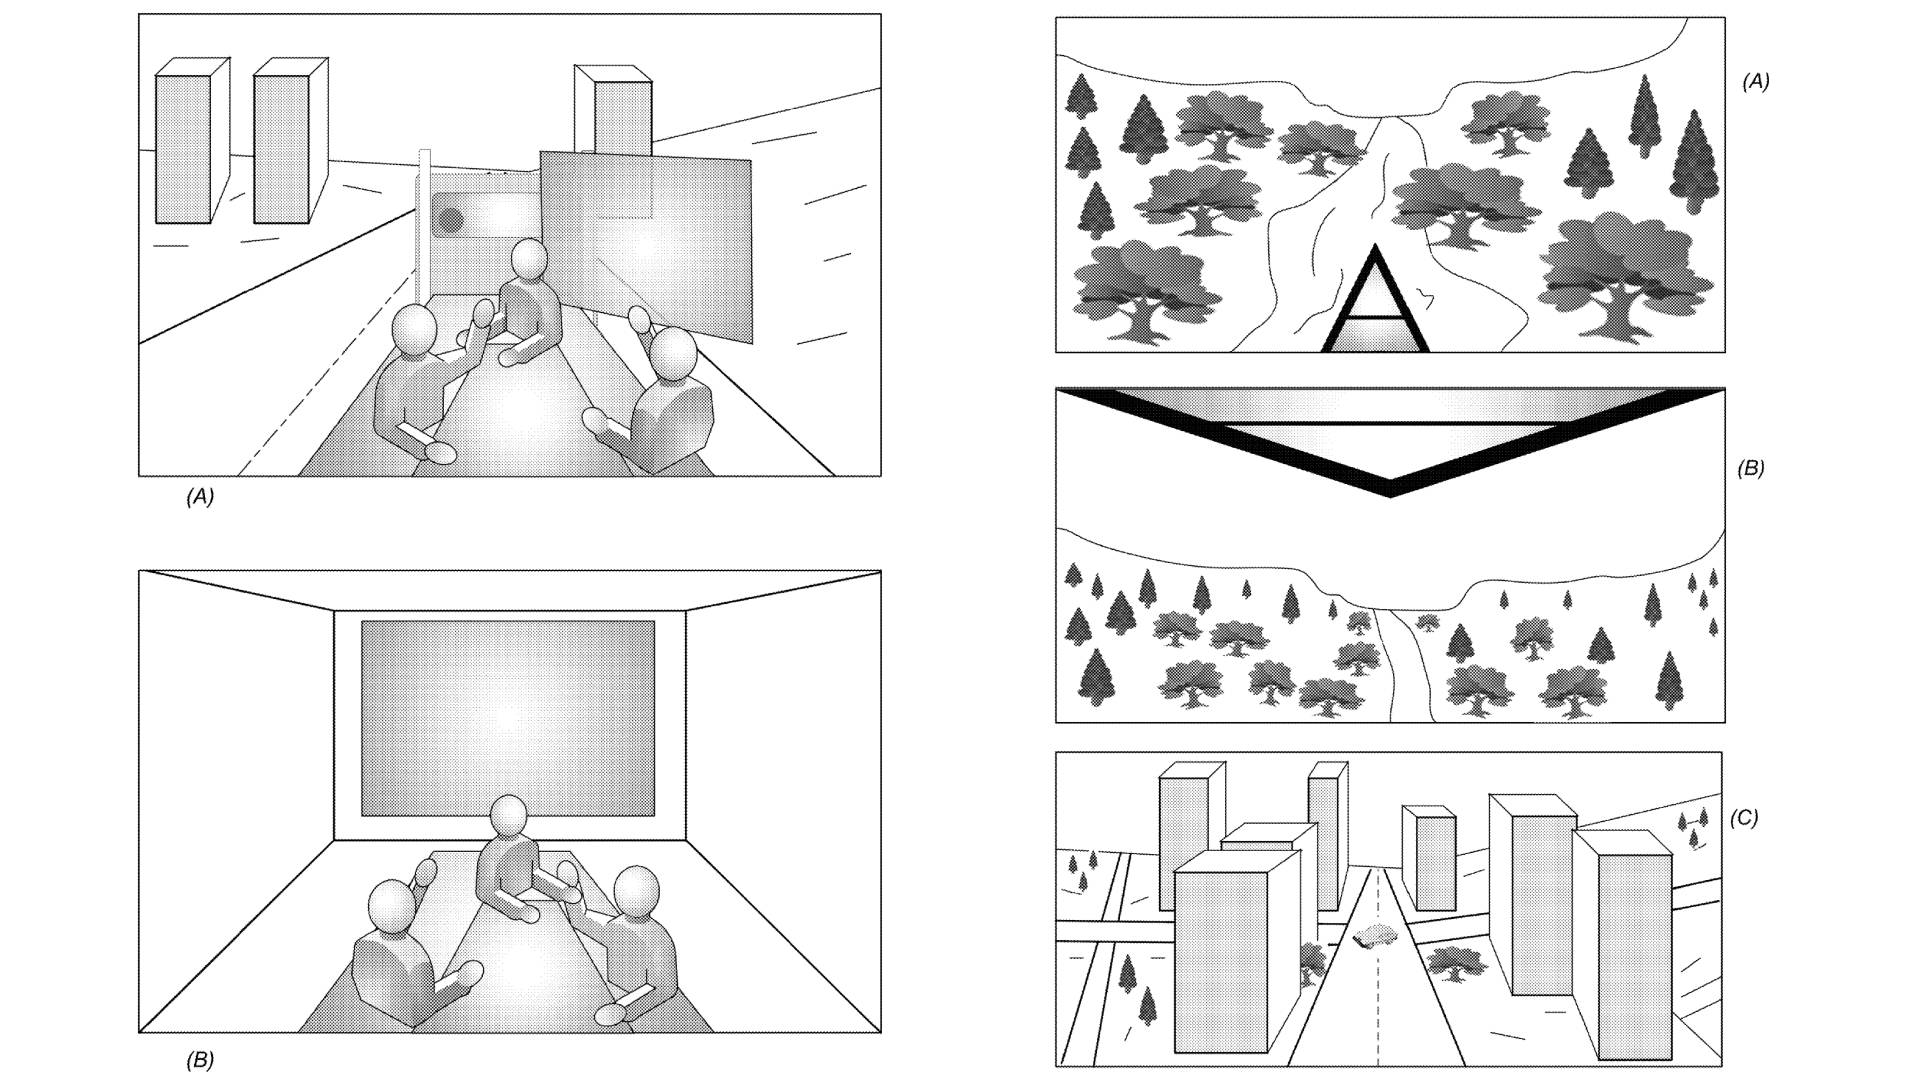 Figures from the Apple Patent showing a meeting in a truck and a serene boat ride